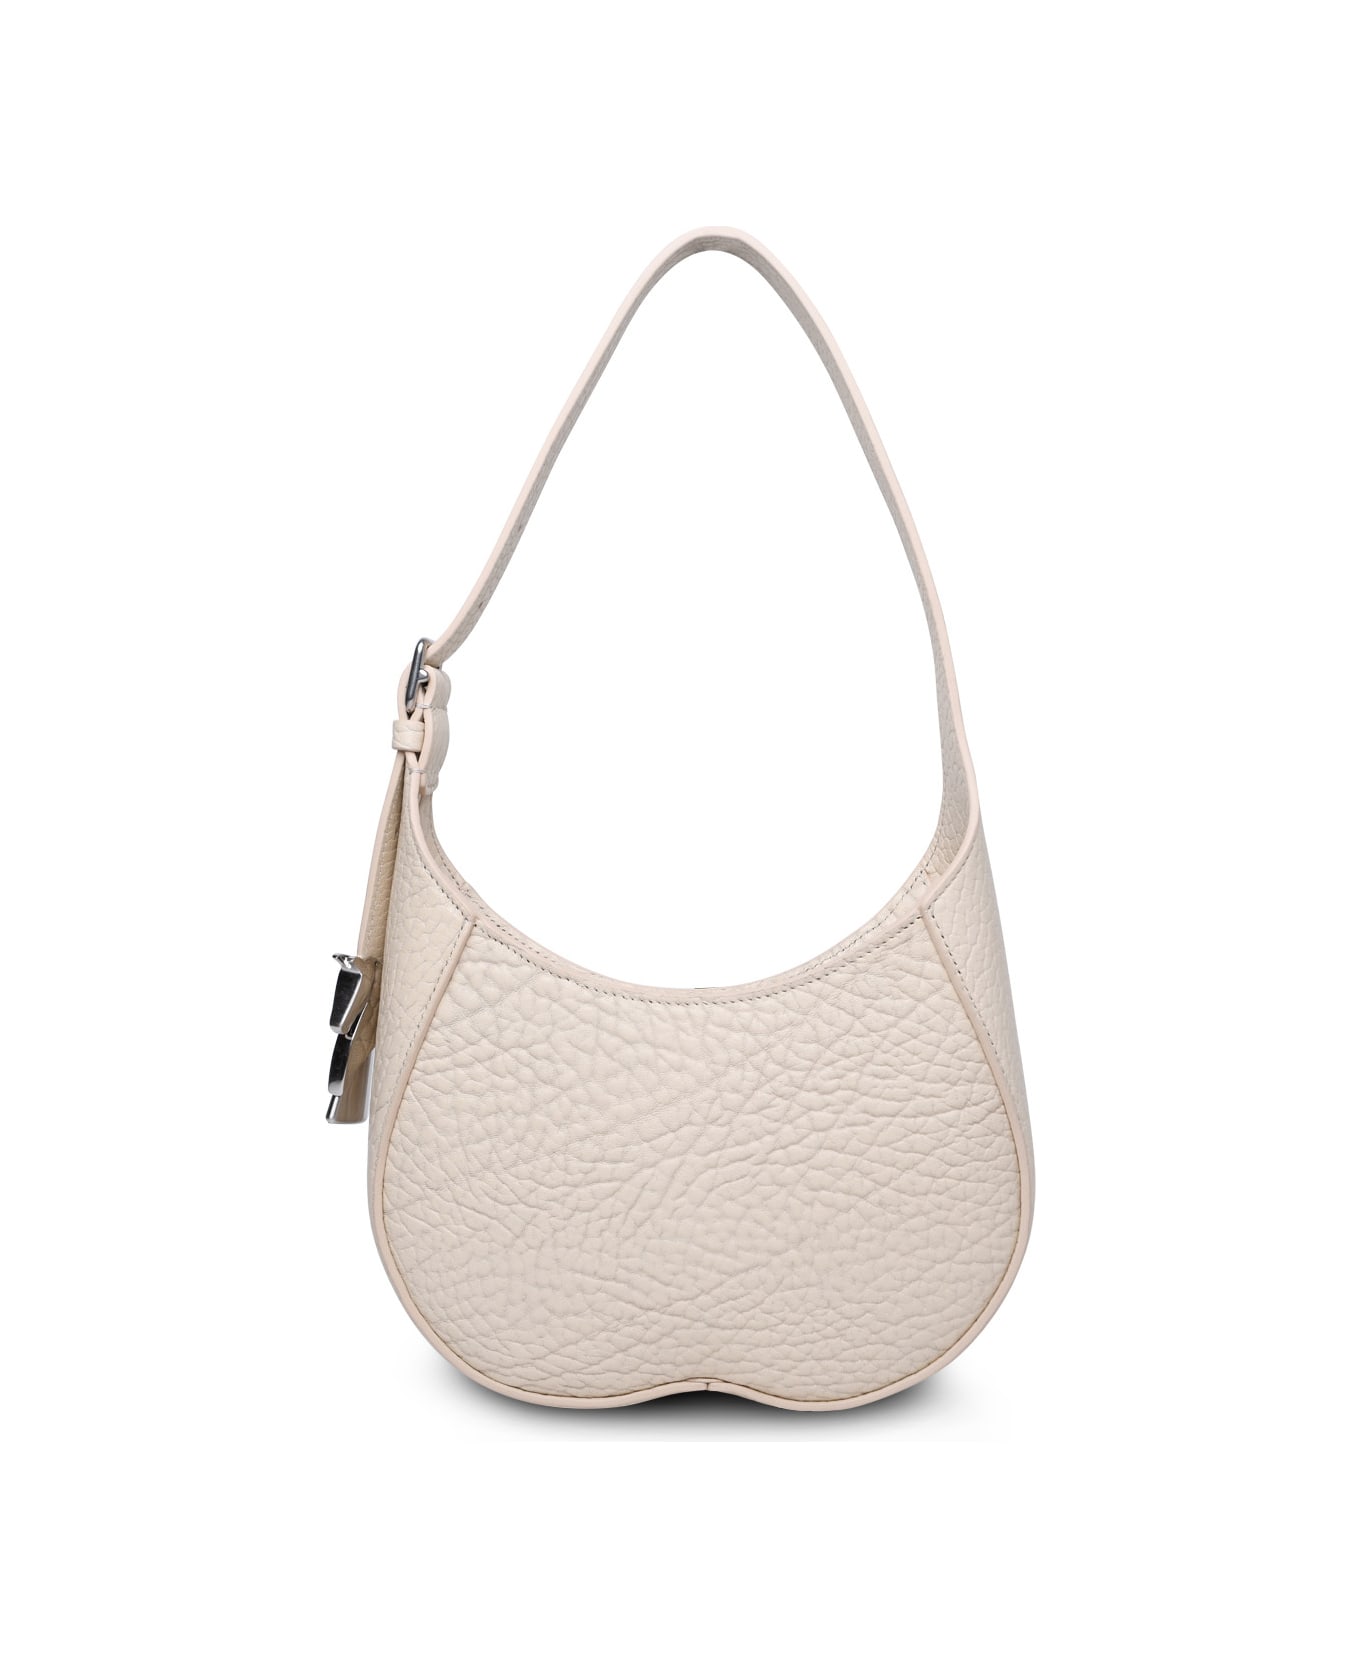 Burberry Small 'chess' Ivory Leather Bag - Ivory